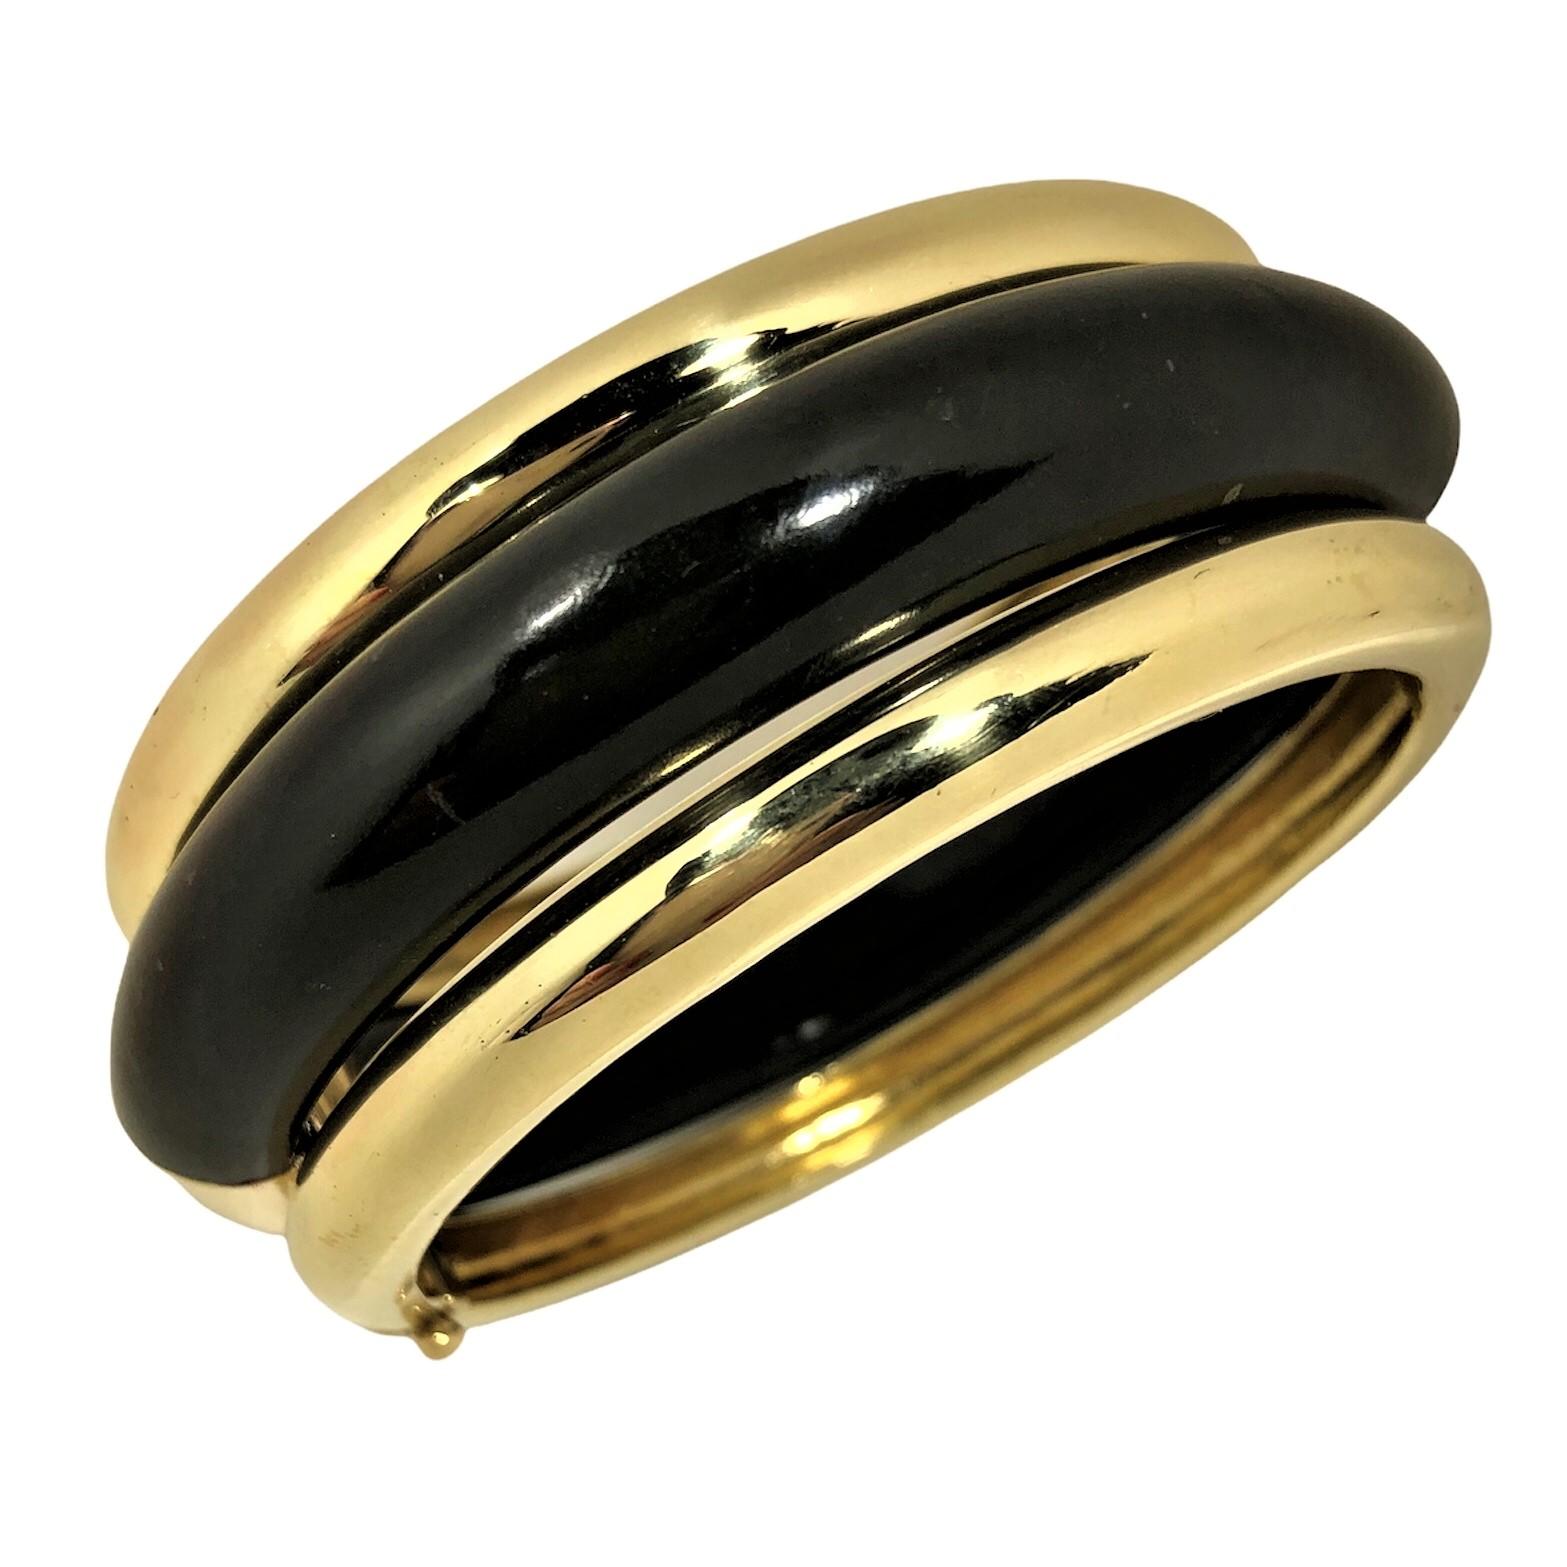 This simple yet powerful 18k bangle bracelet is designed as three concentric bands, those being one black jade section bracketed by 18k yellow gold somewhat narrower bands. The total width is approximately one inch. Everything about it speaks of the